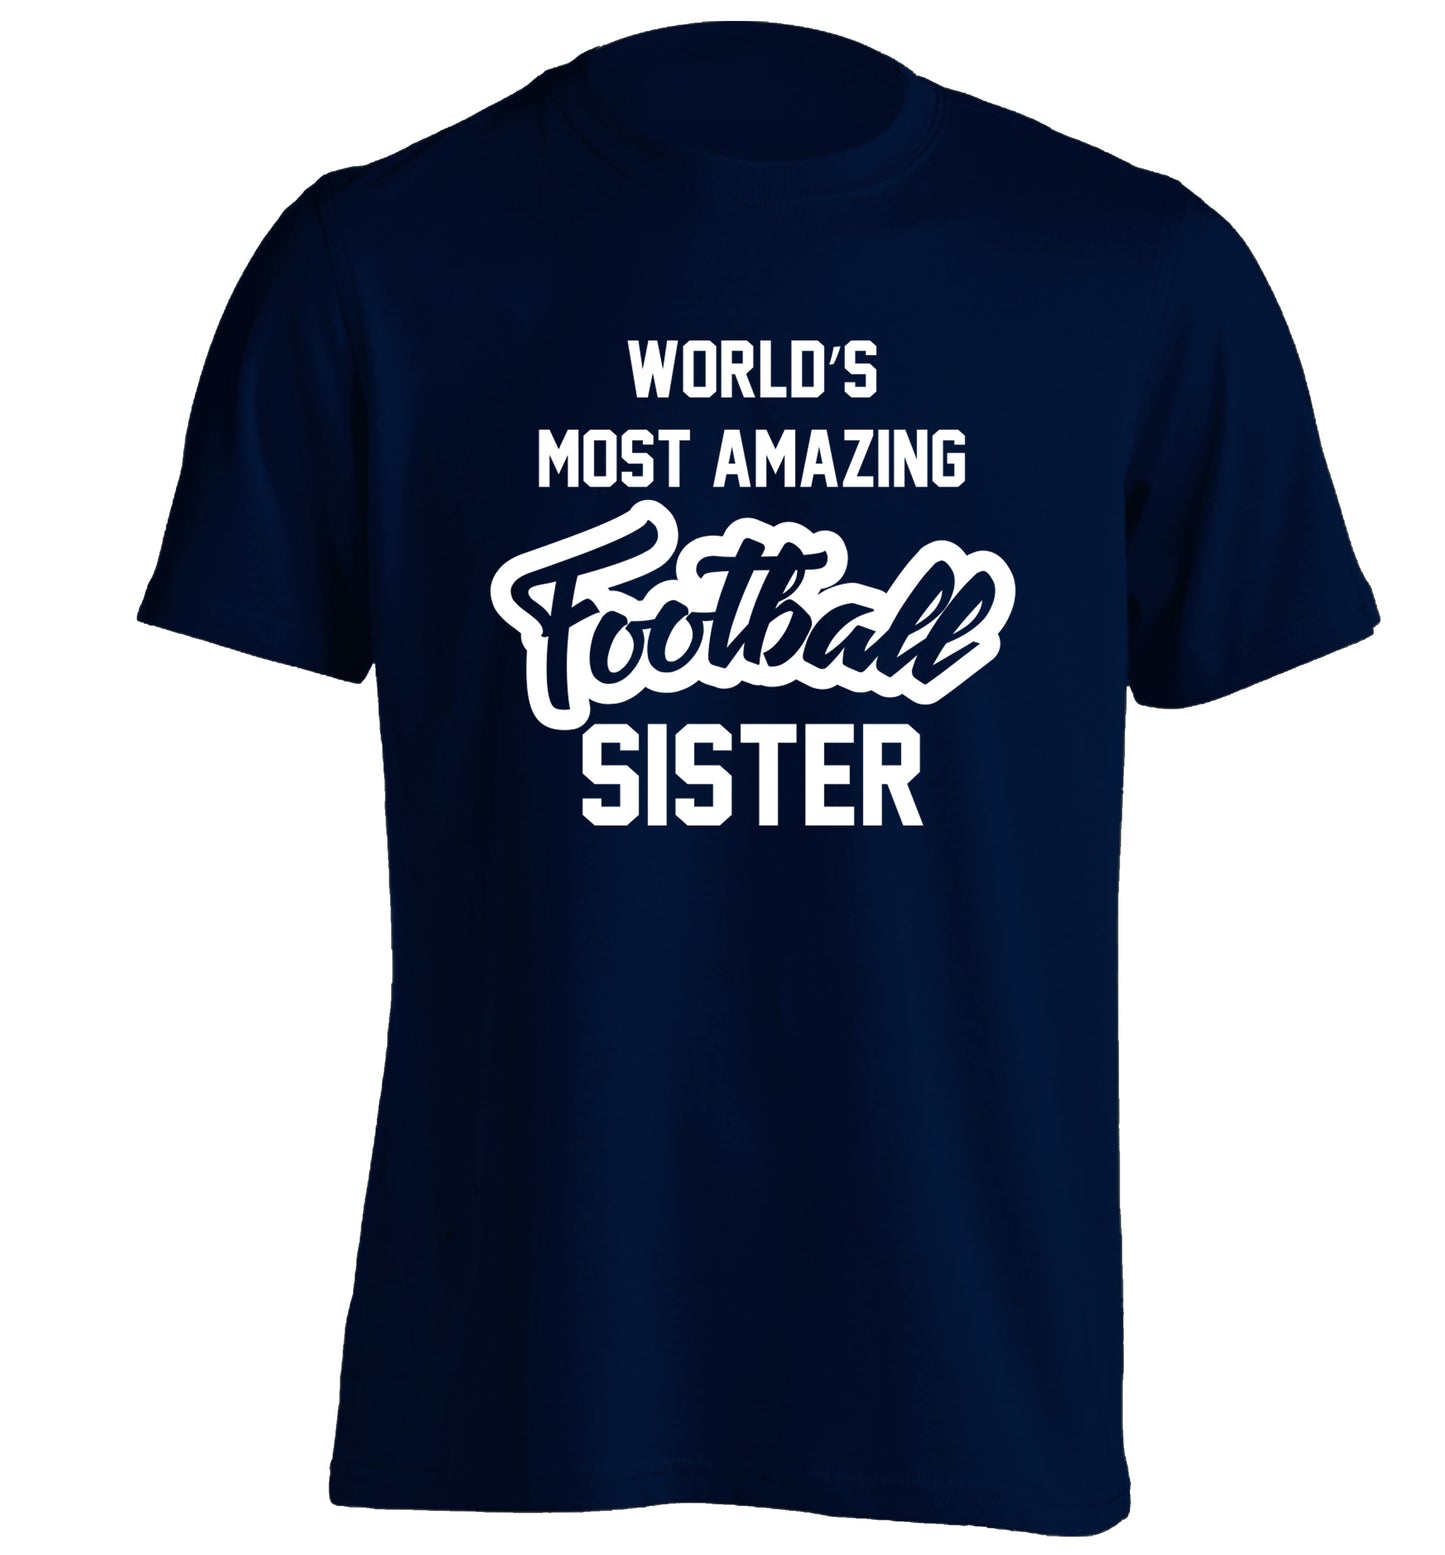 Worlds most amazing football sister adults unisexnavy Tshirt 2XL